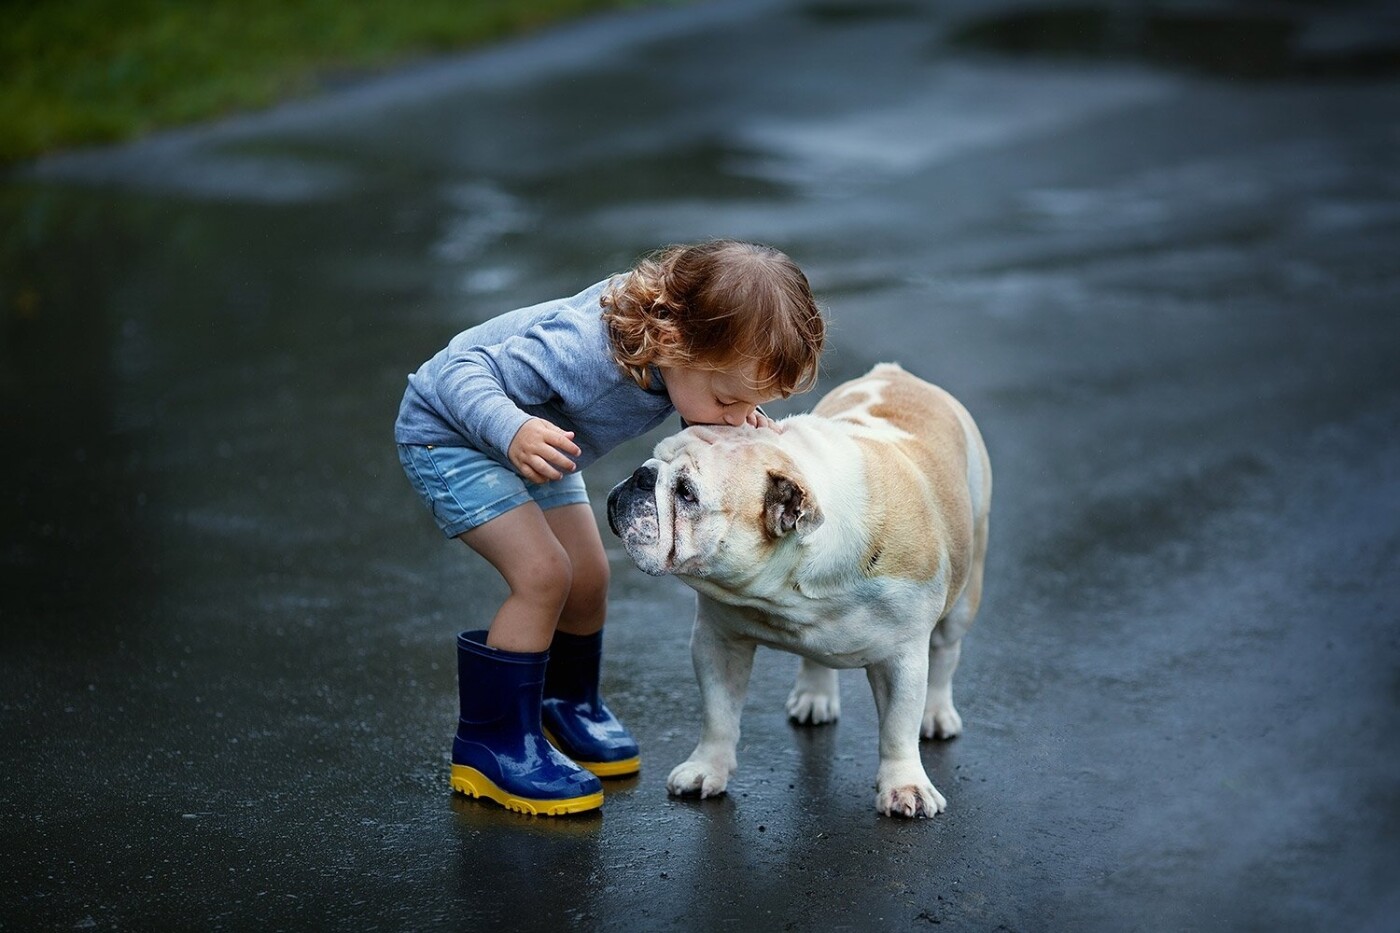 It was time after pouring rain and shooting with beautiful little girl Maria and her best friend - english bulldog Ozzy. She likes her dog very much! And it was great pleasure for me to see they cute relationship. Kids with their pets always look very nice and sweet.